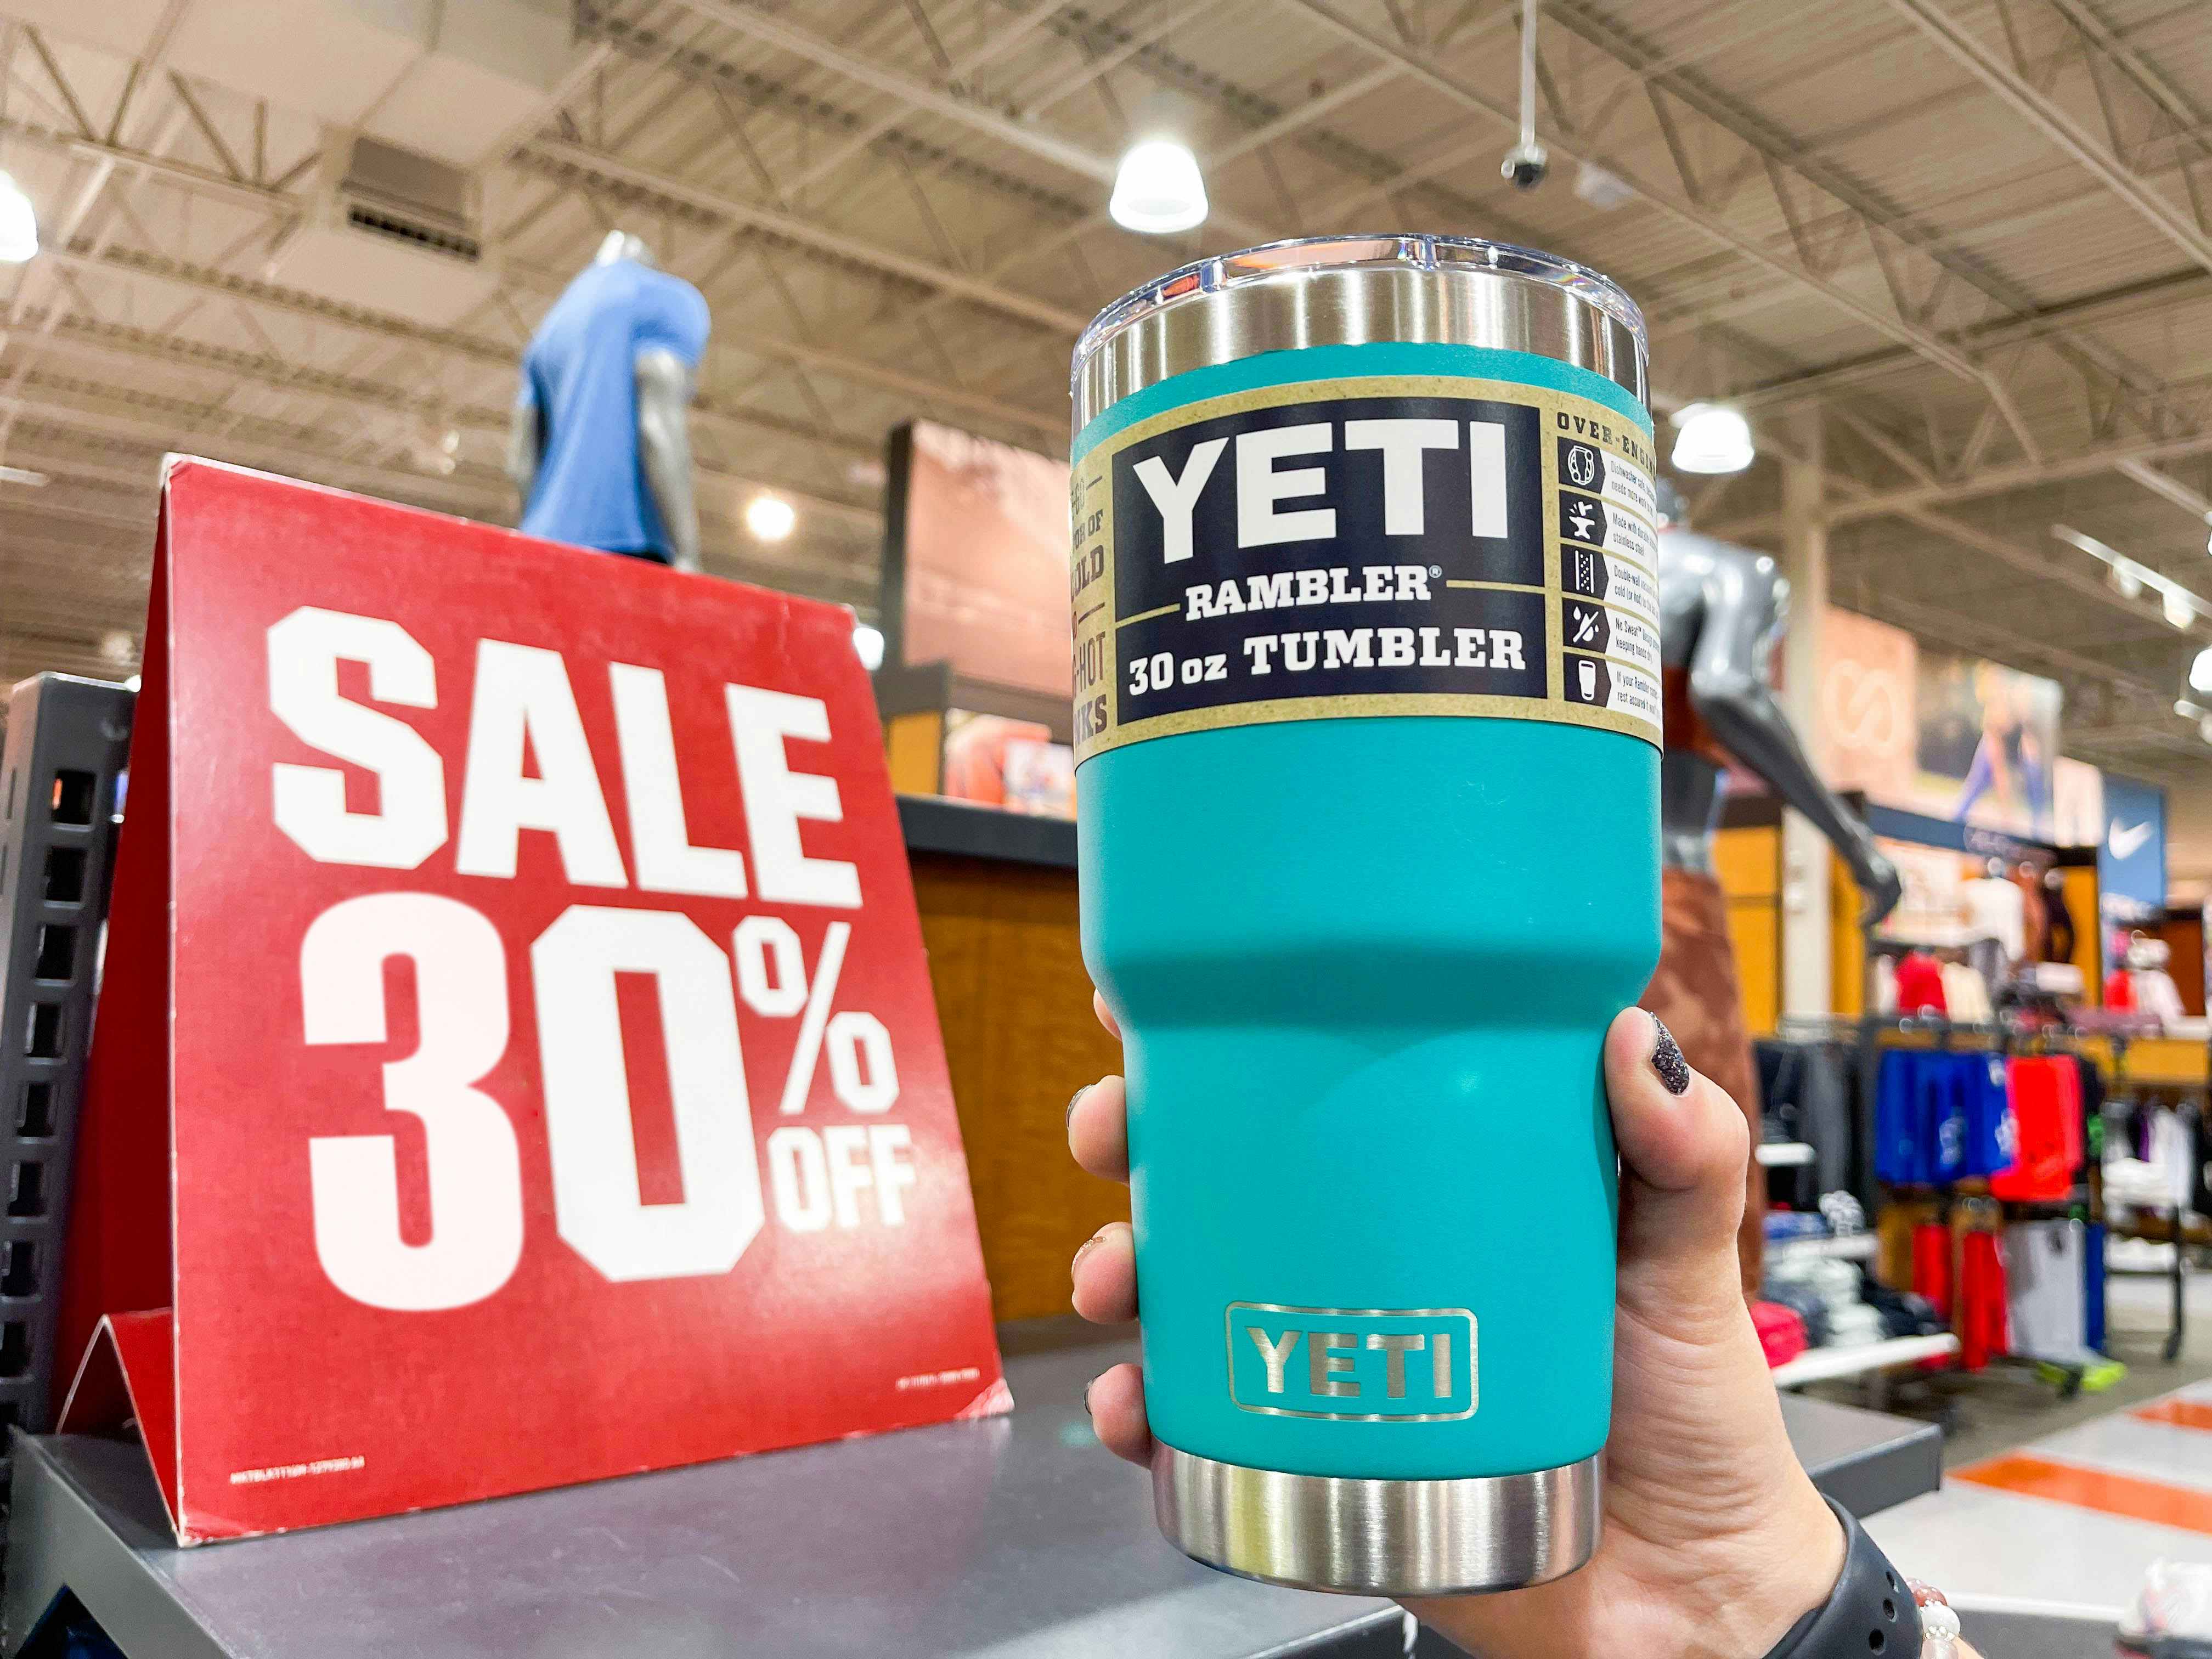 A person's hand holding a Yeti Rambler tumbler near a 30% off sale sign.